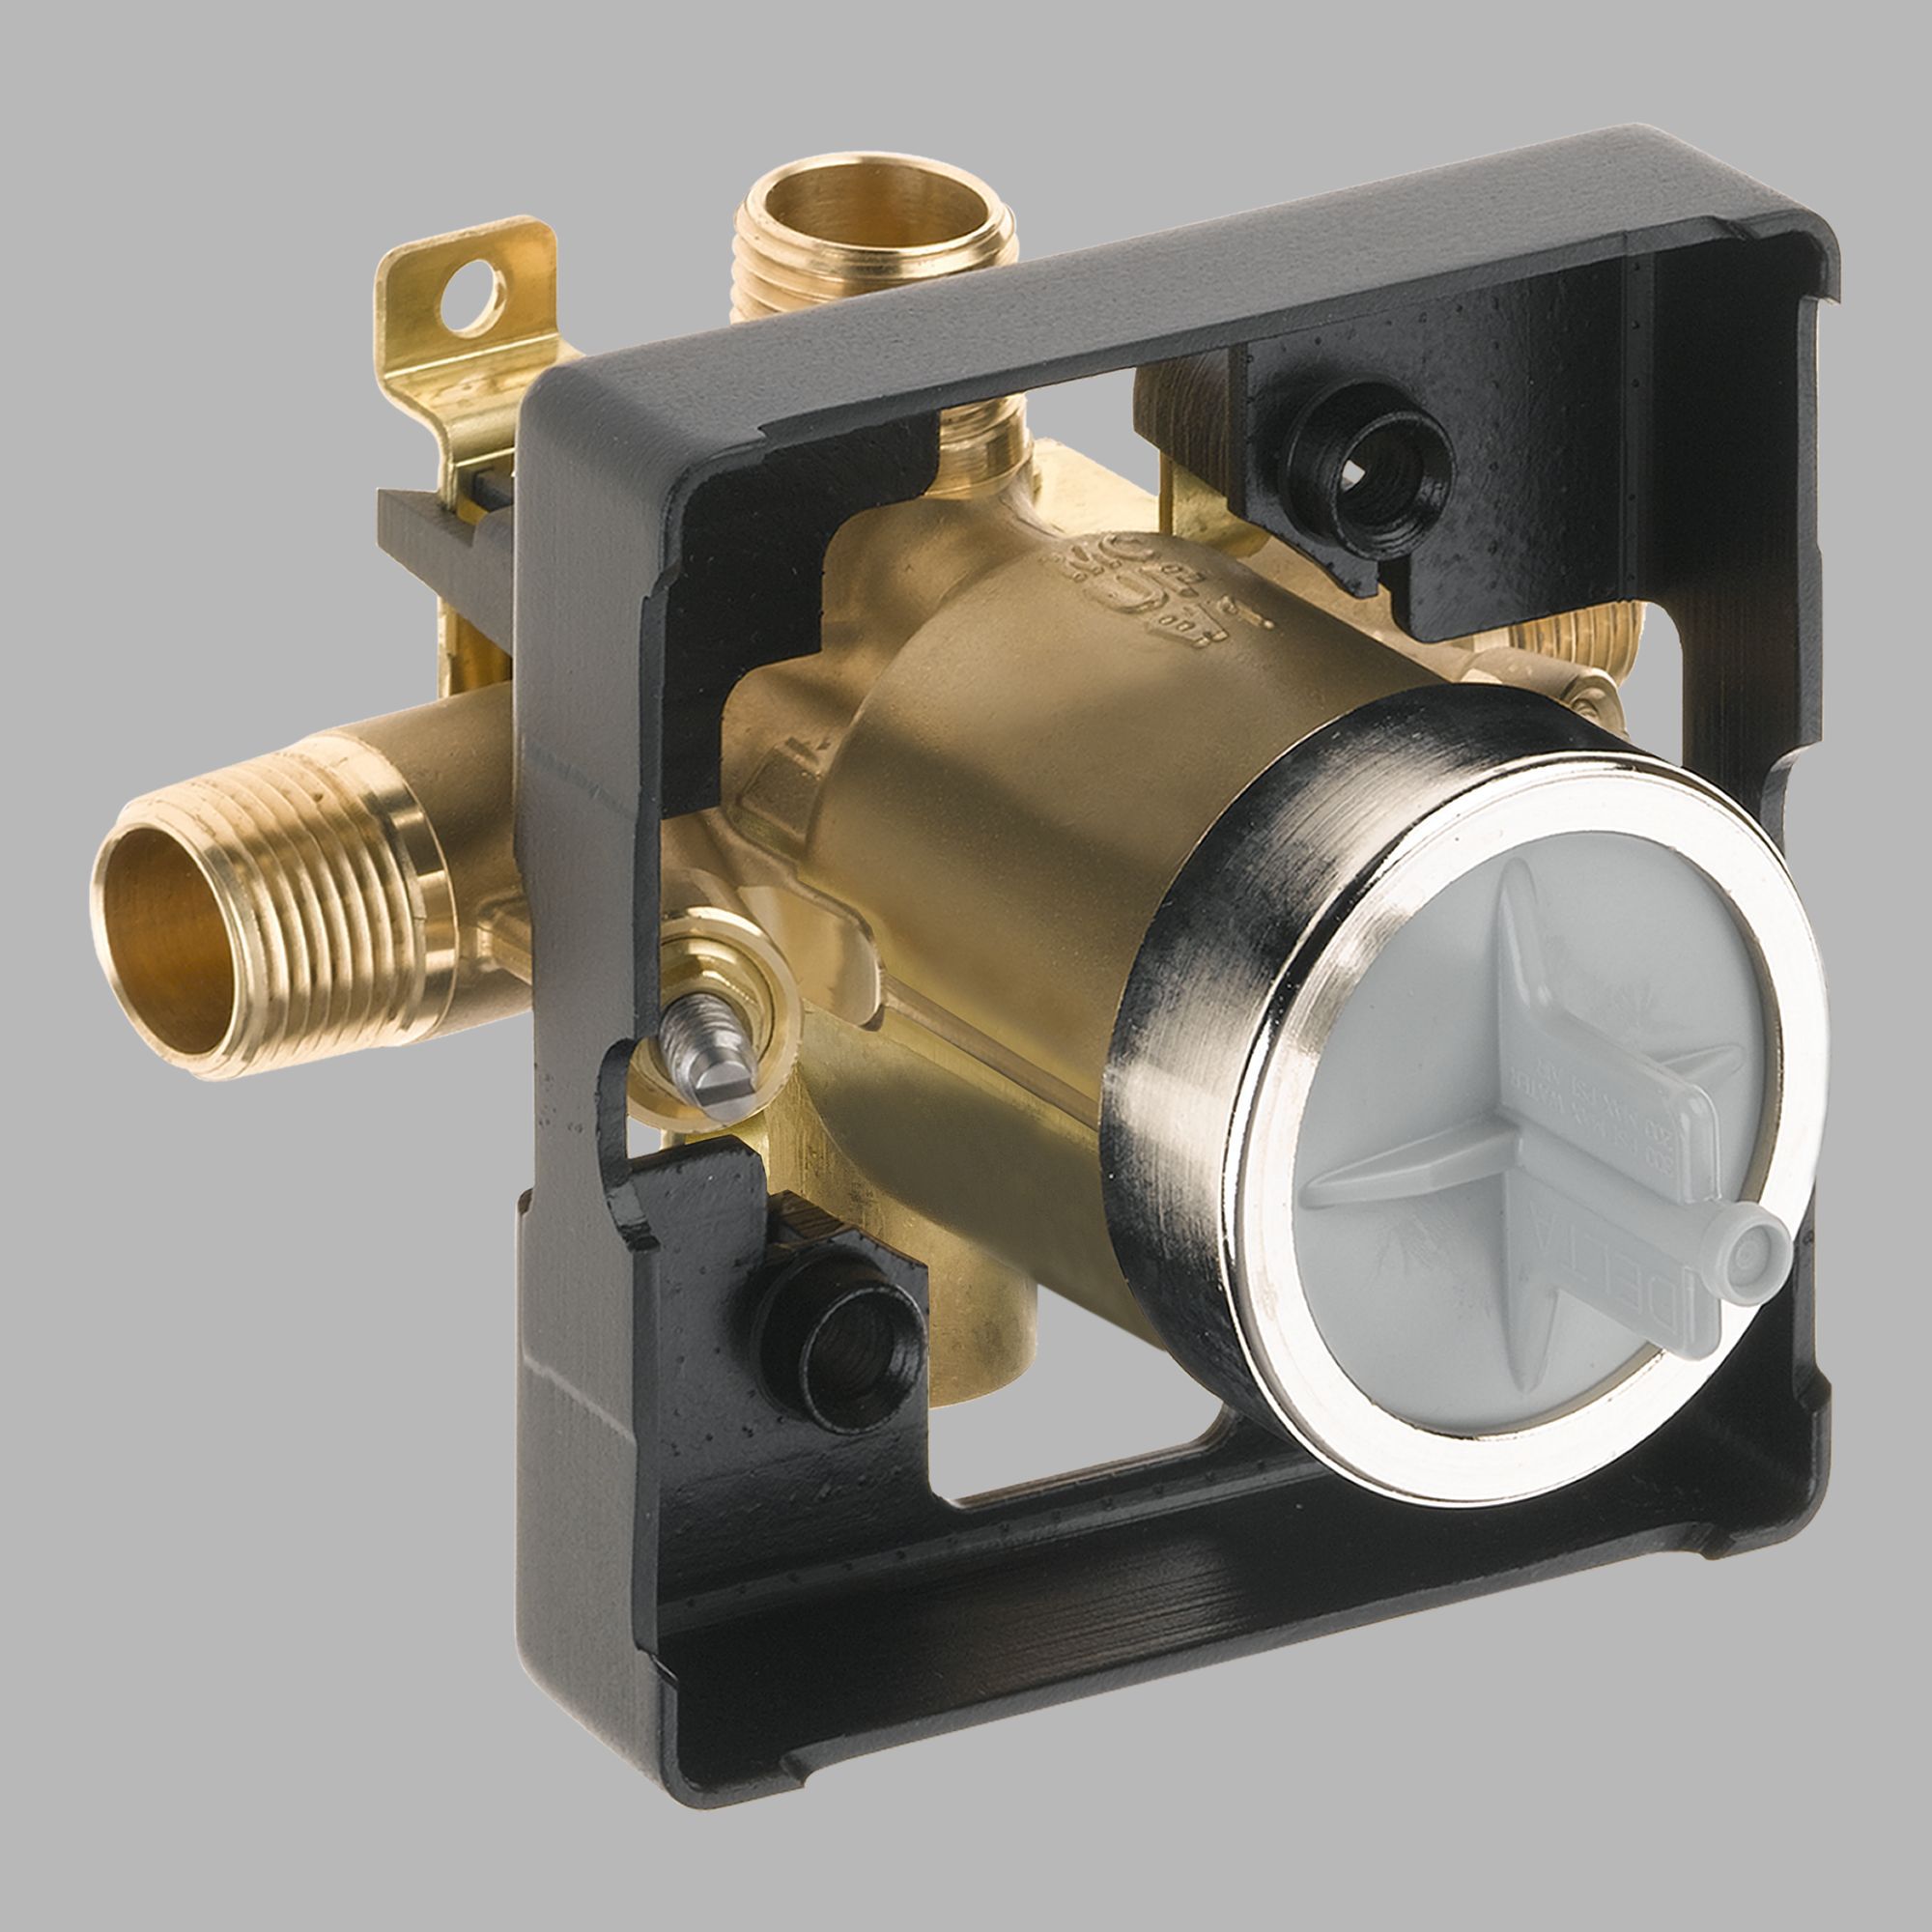 Delta Multichoice(R) Universal Tub And Shower Valve Body